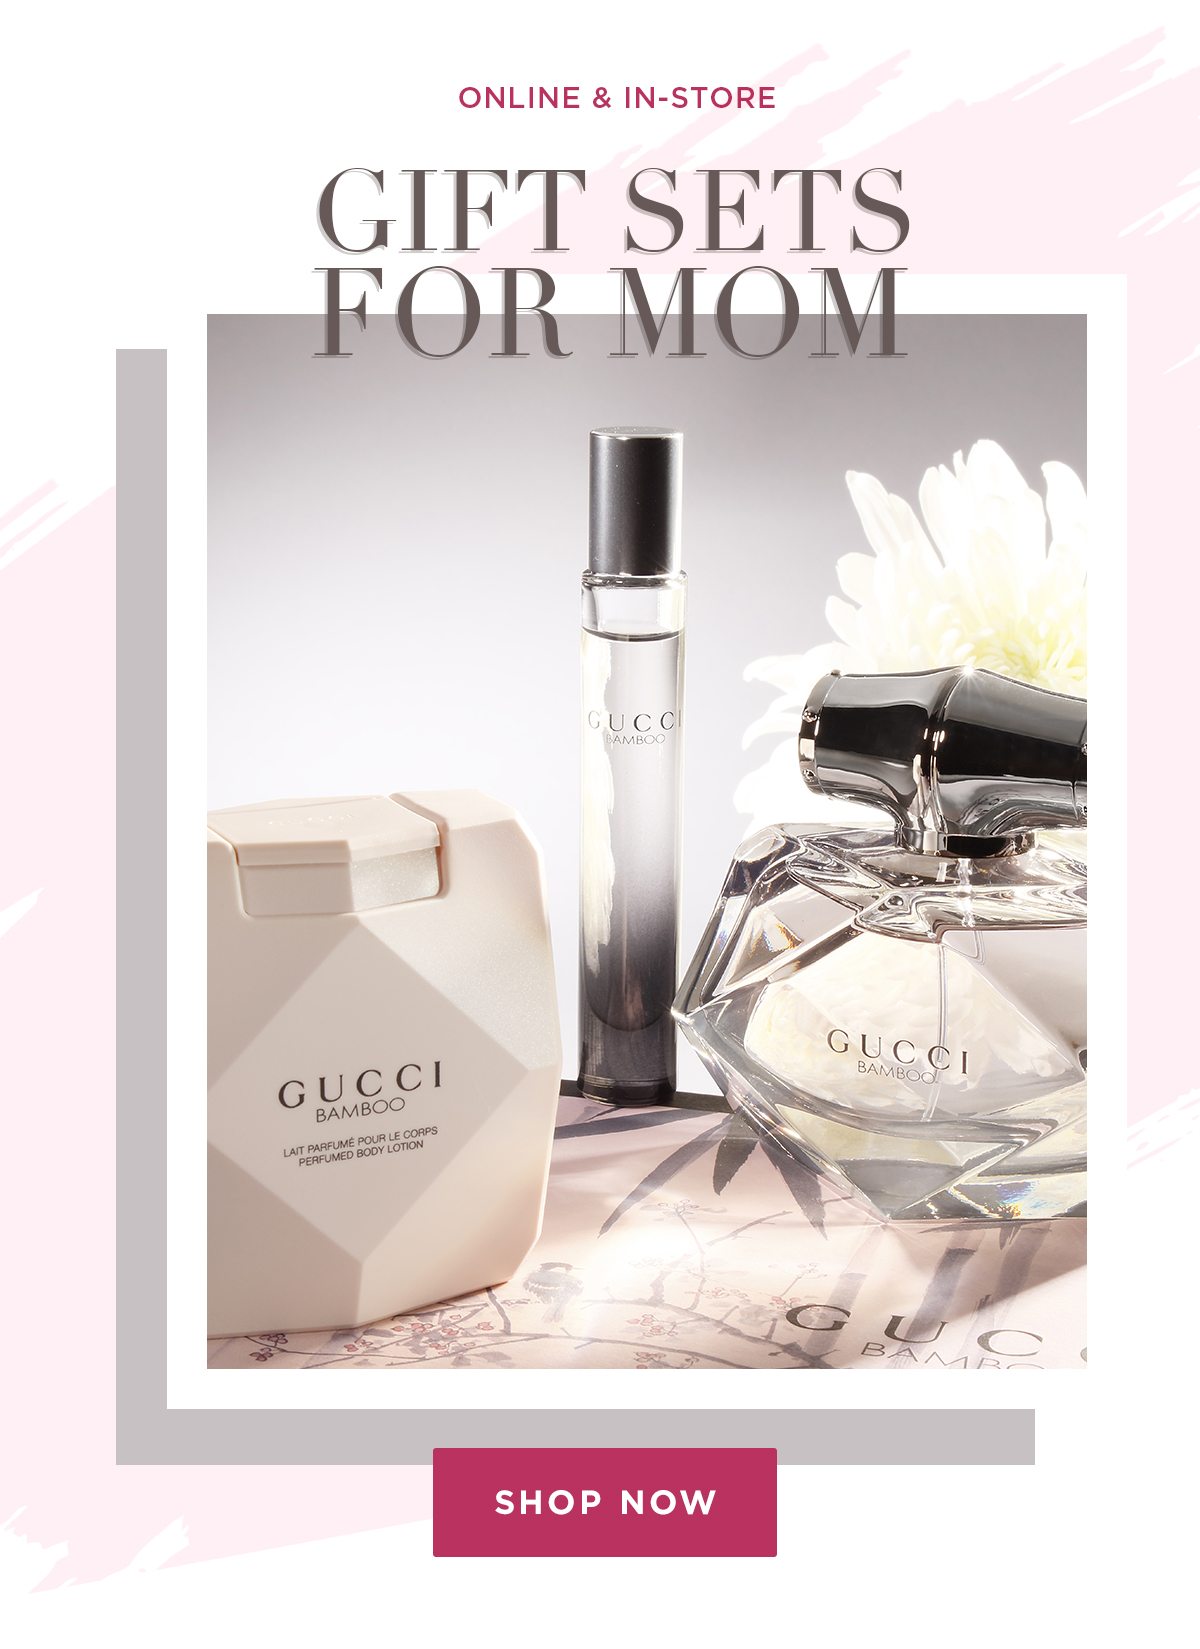 Online & In-Store Giftsets For Mom - Show Now